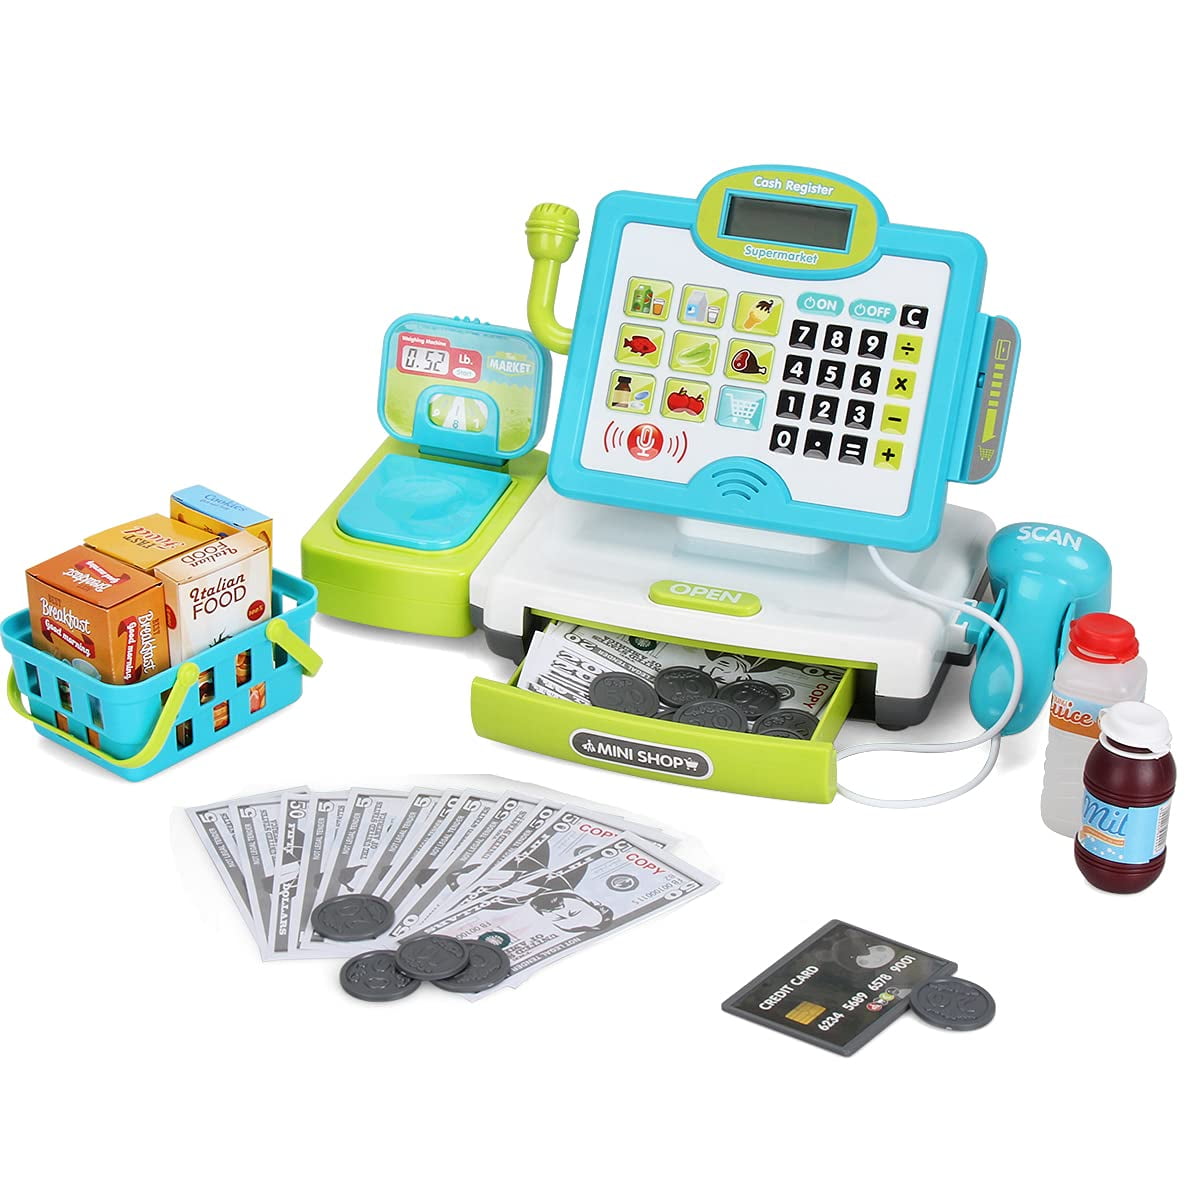 FS Pretend Play Educational Toy Cash Register for Kids 3 8 Years Old with Calculator Microphone Scanner 27dfc3fa c189 4d56 aab1 7603eb4f0ea5.547b495144000c0daa724034c6b34526